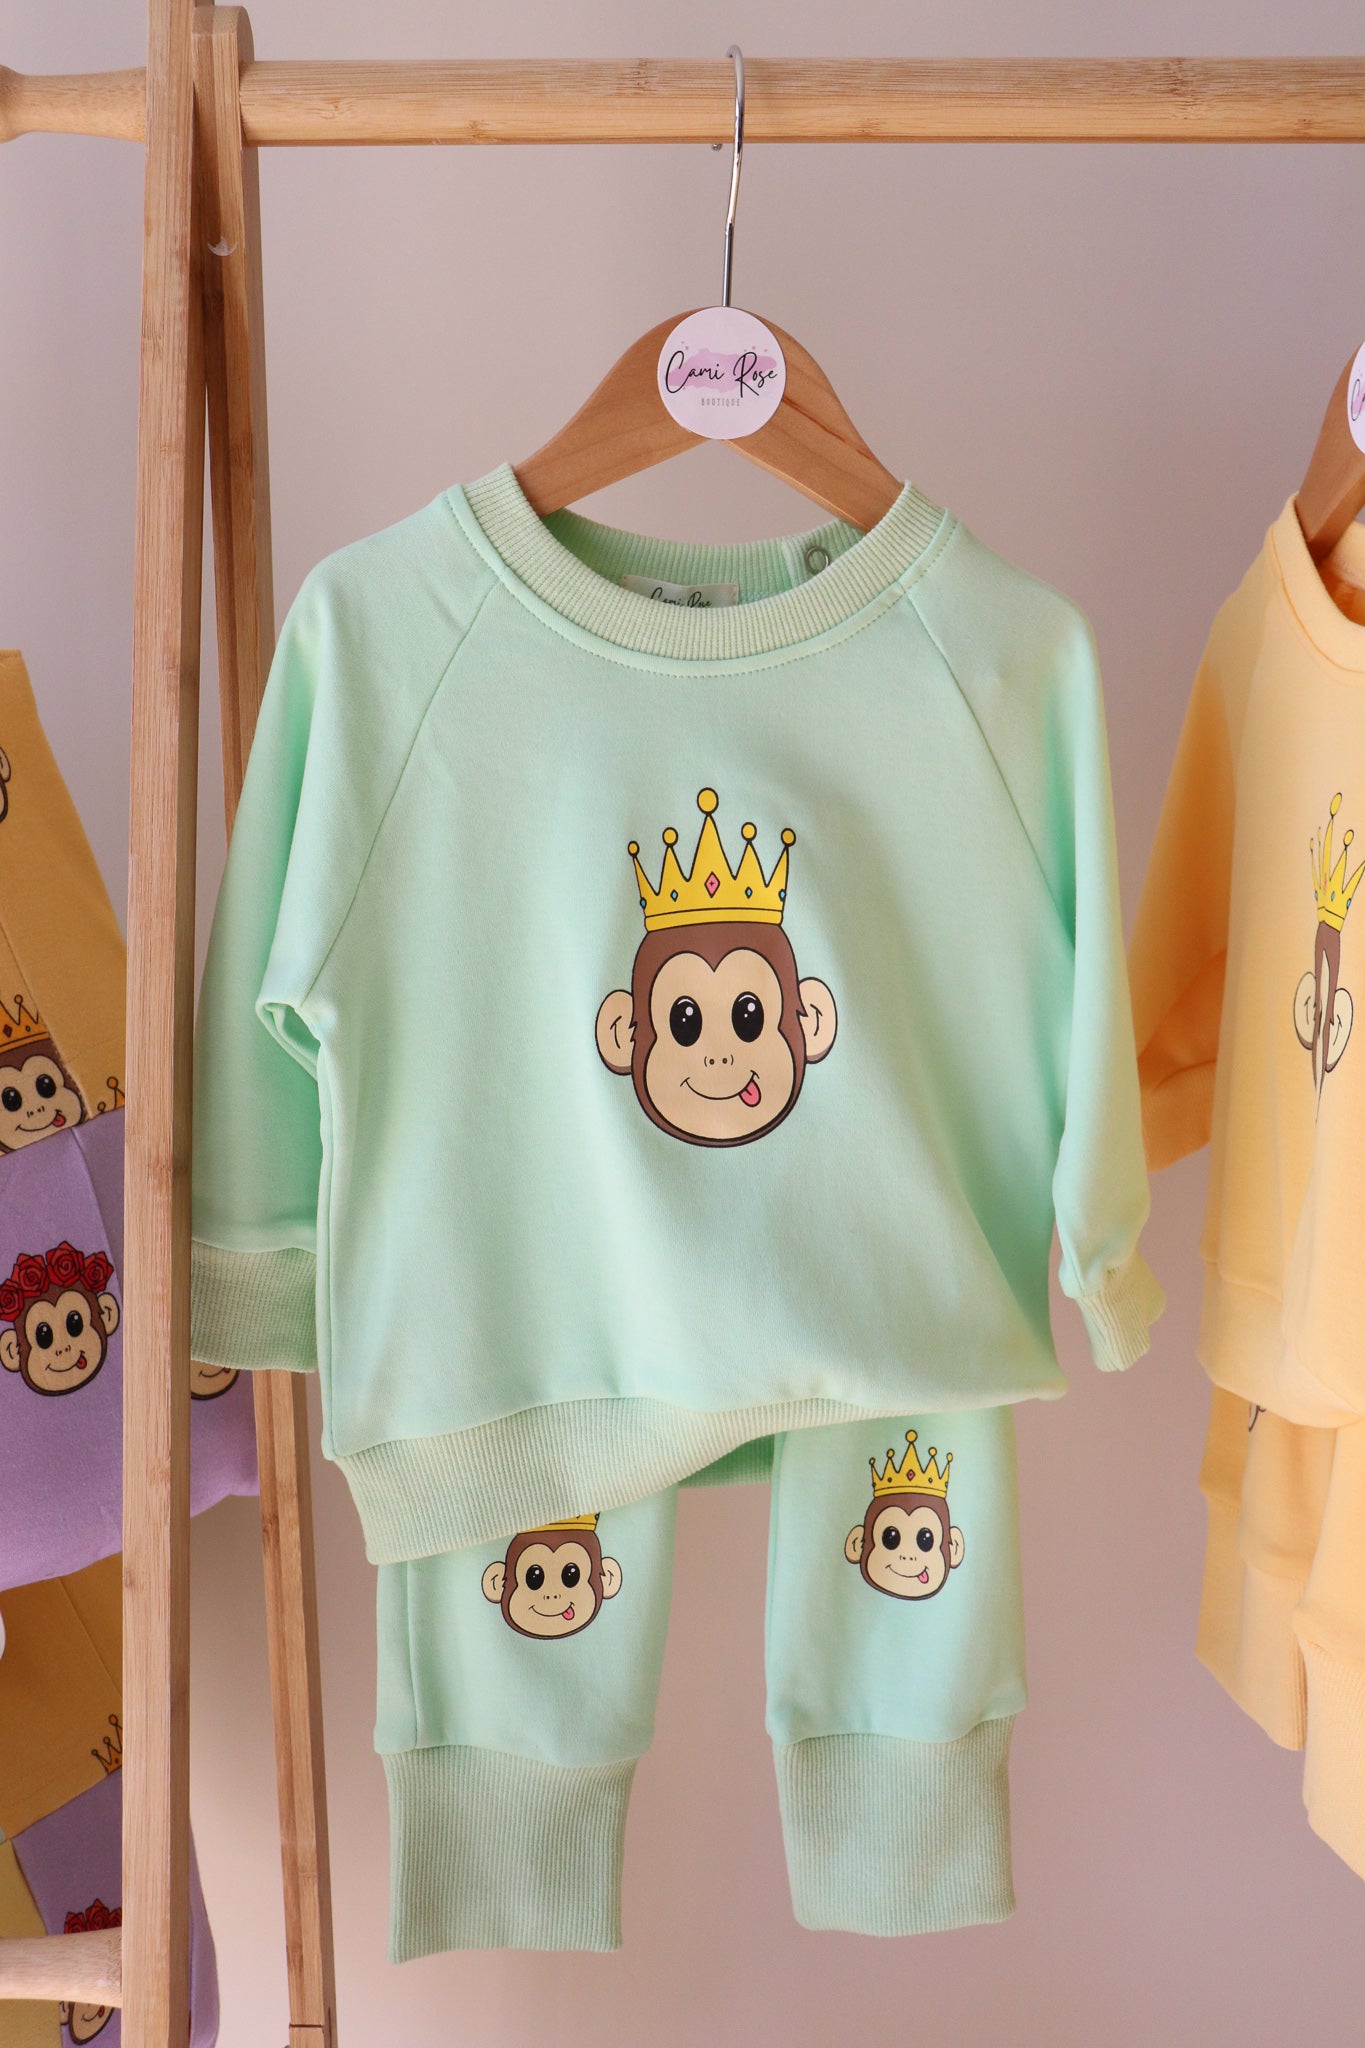 baby green lounge set with a cute monkey design printed on jumper and on the knees of pants